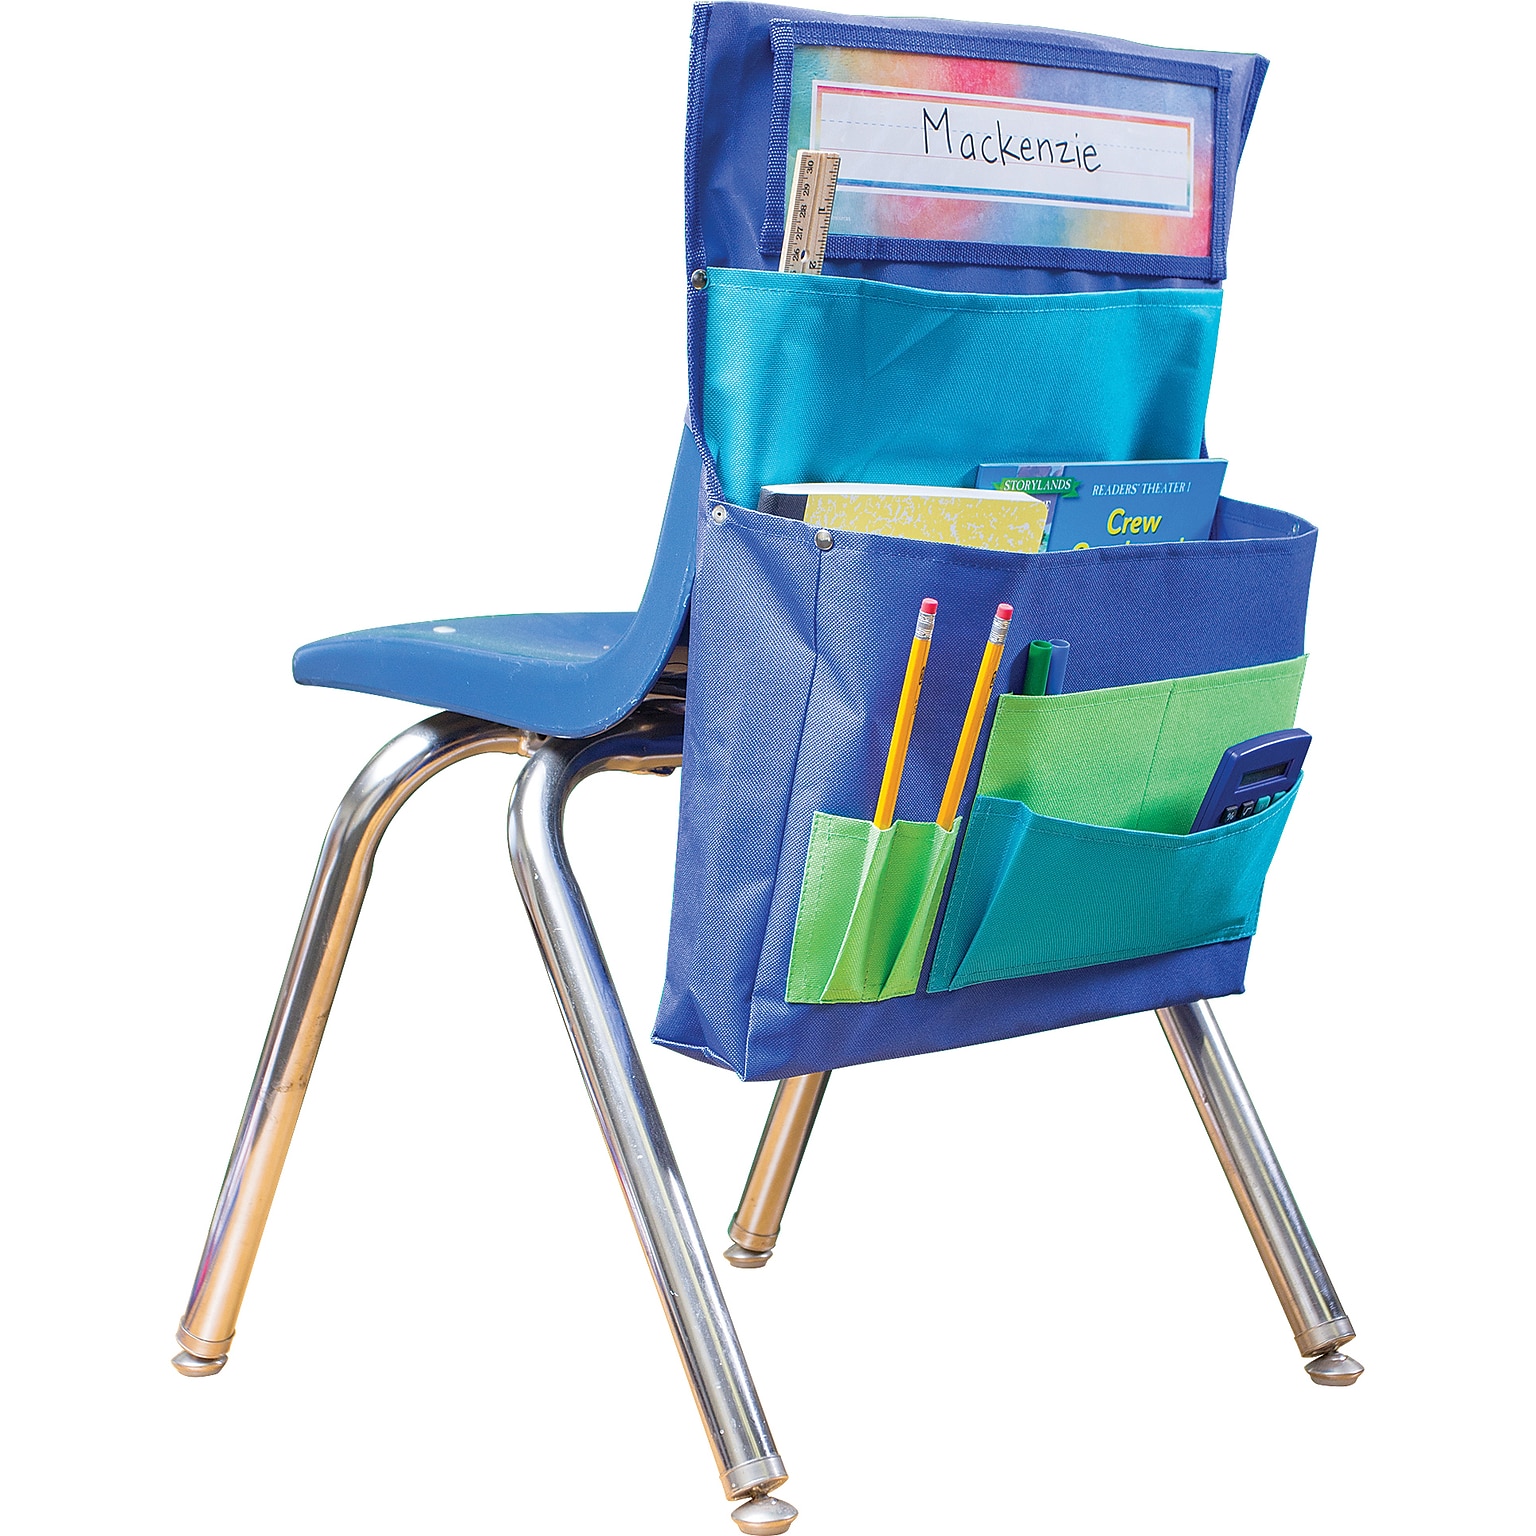 Teacher Created Resources 15W Chair Pocket, Blue, Teal & Lime (TCR20970)